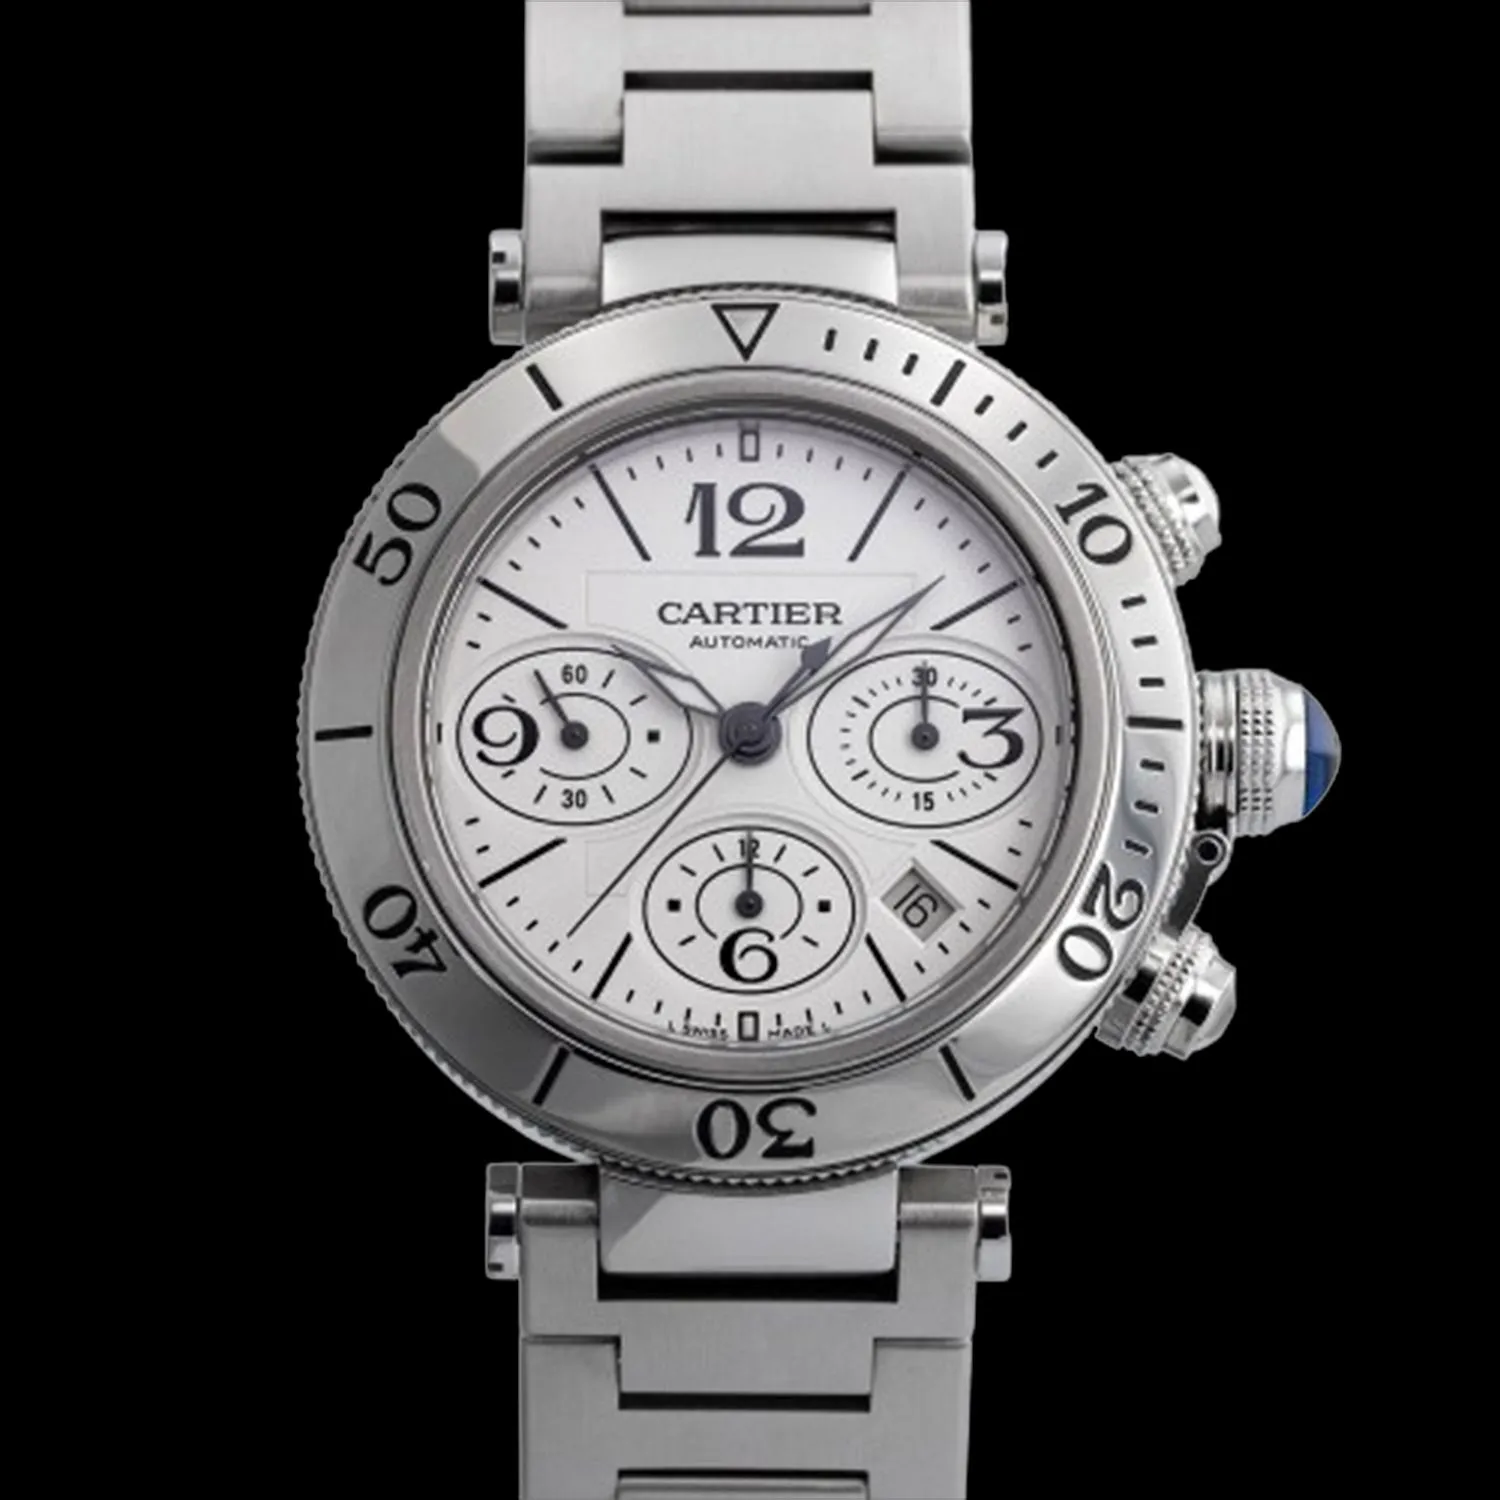 Cartier Pasha Seatimer 41.5mm Stainless steel